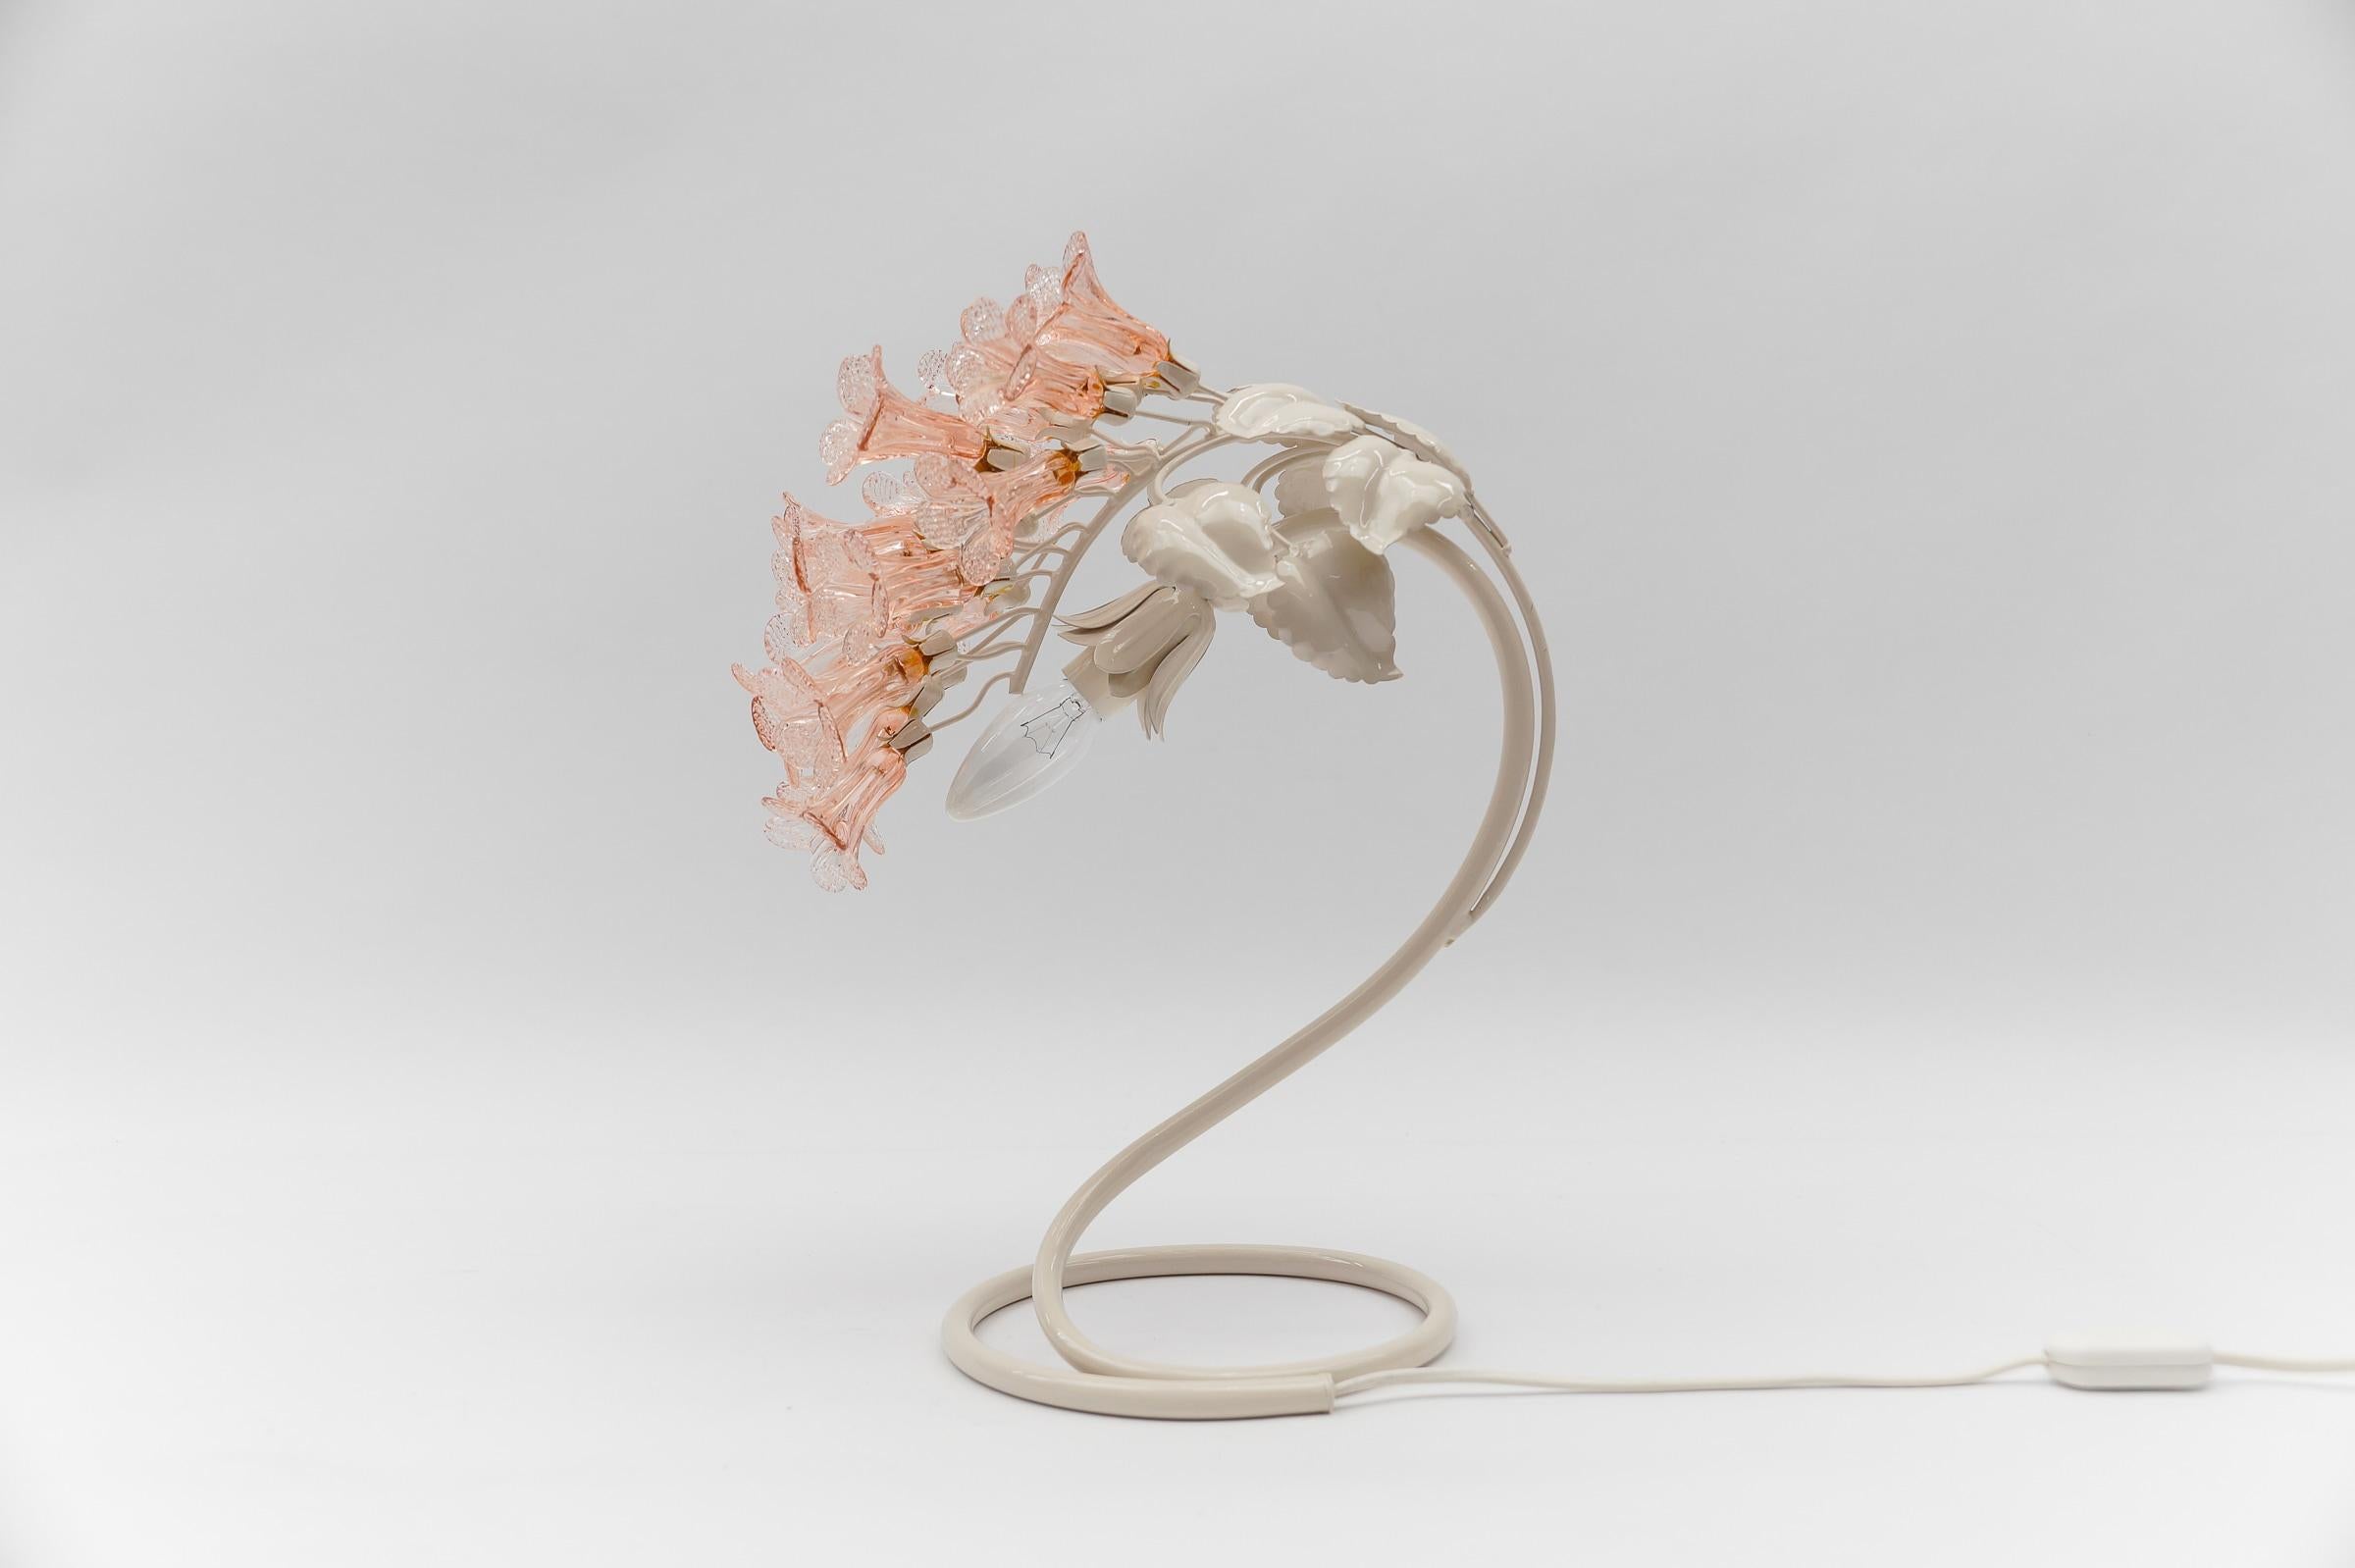 Italian Modern Table Lamp made in Pink Murano Glass Flowers, 1960s Italy For Sale 3